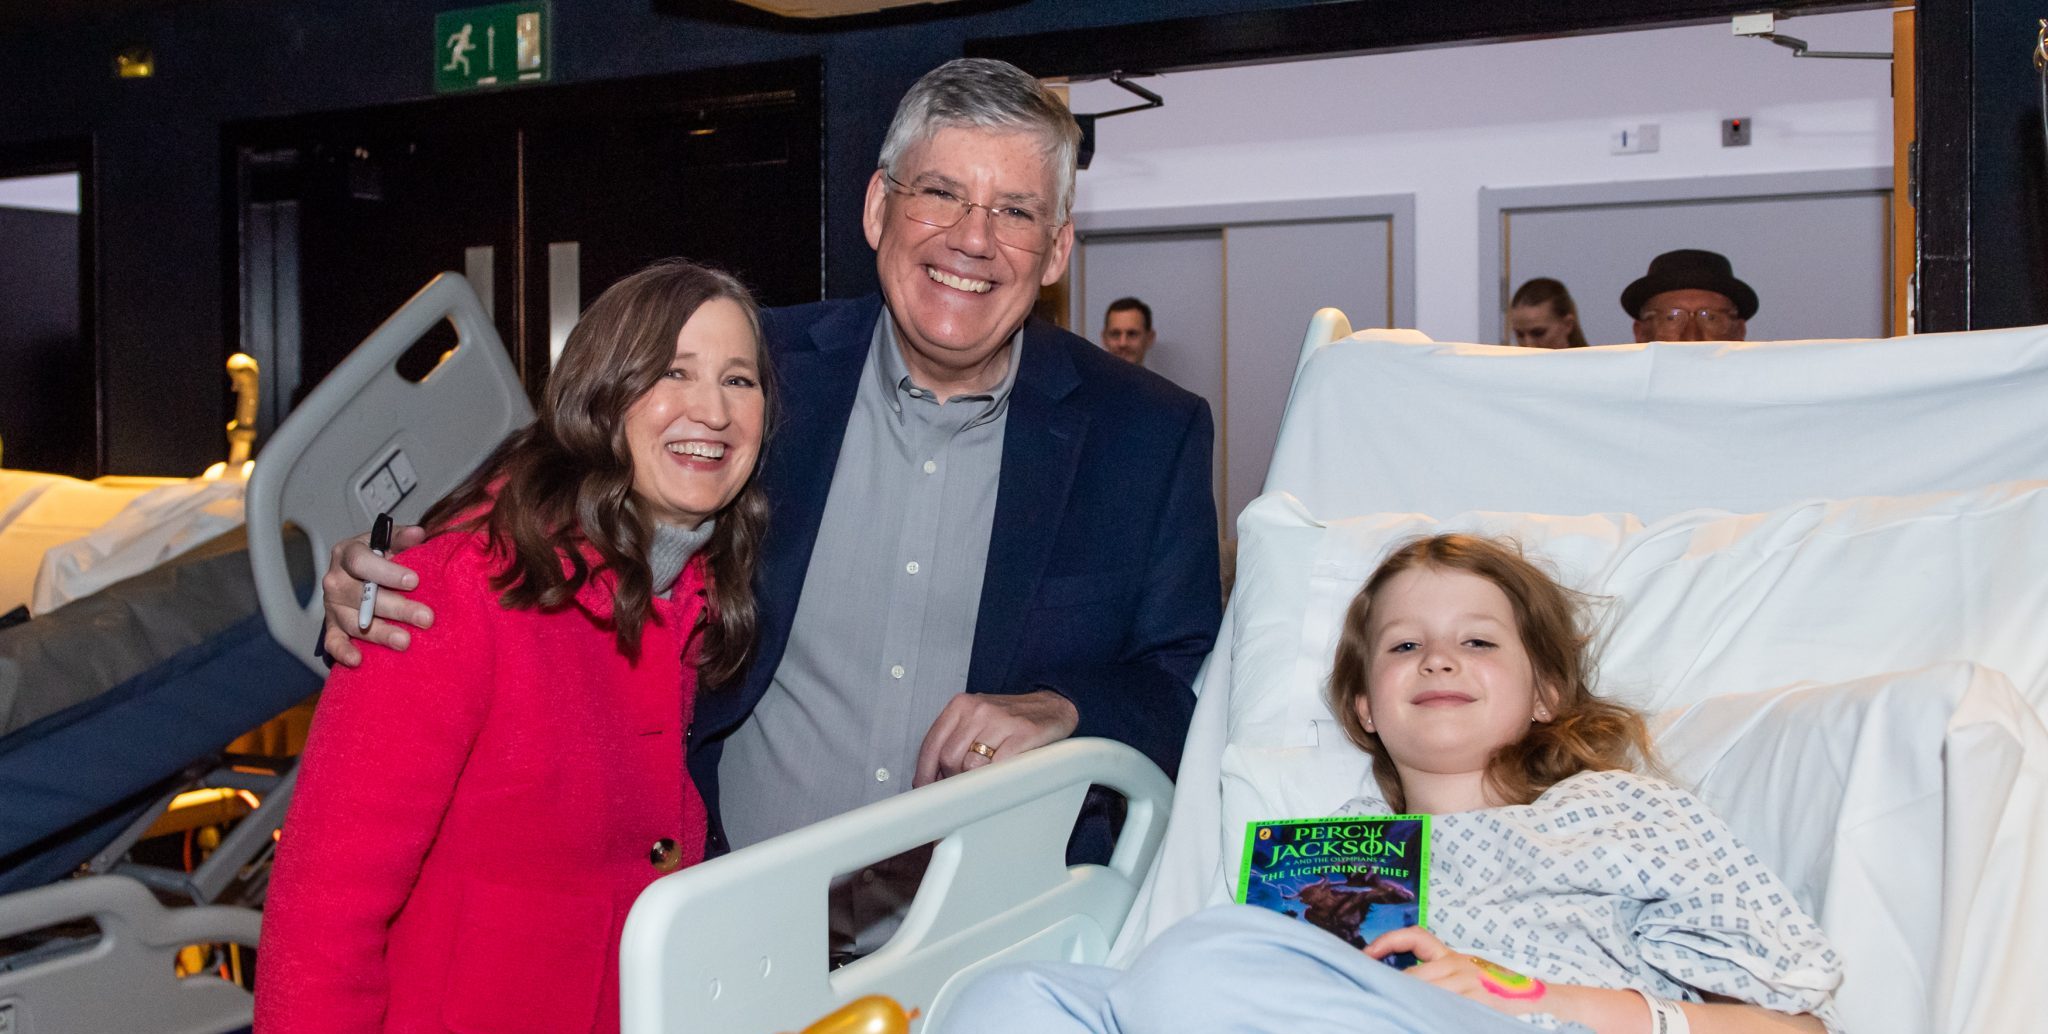 Author Rick Riordan joins MediCinema UK Hospital Patients to see Disney+ series “Percy Jackson and the Olympians”